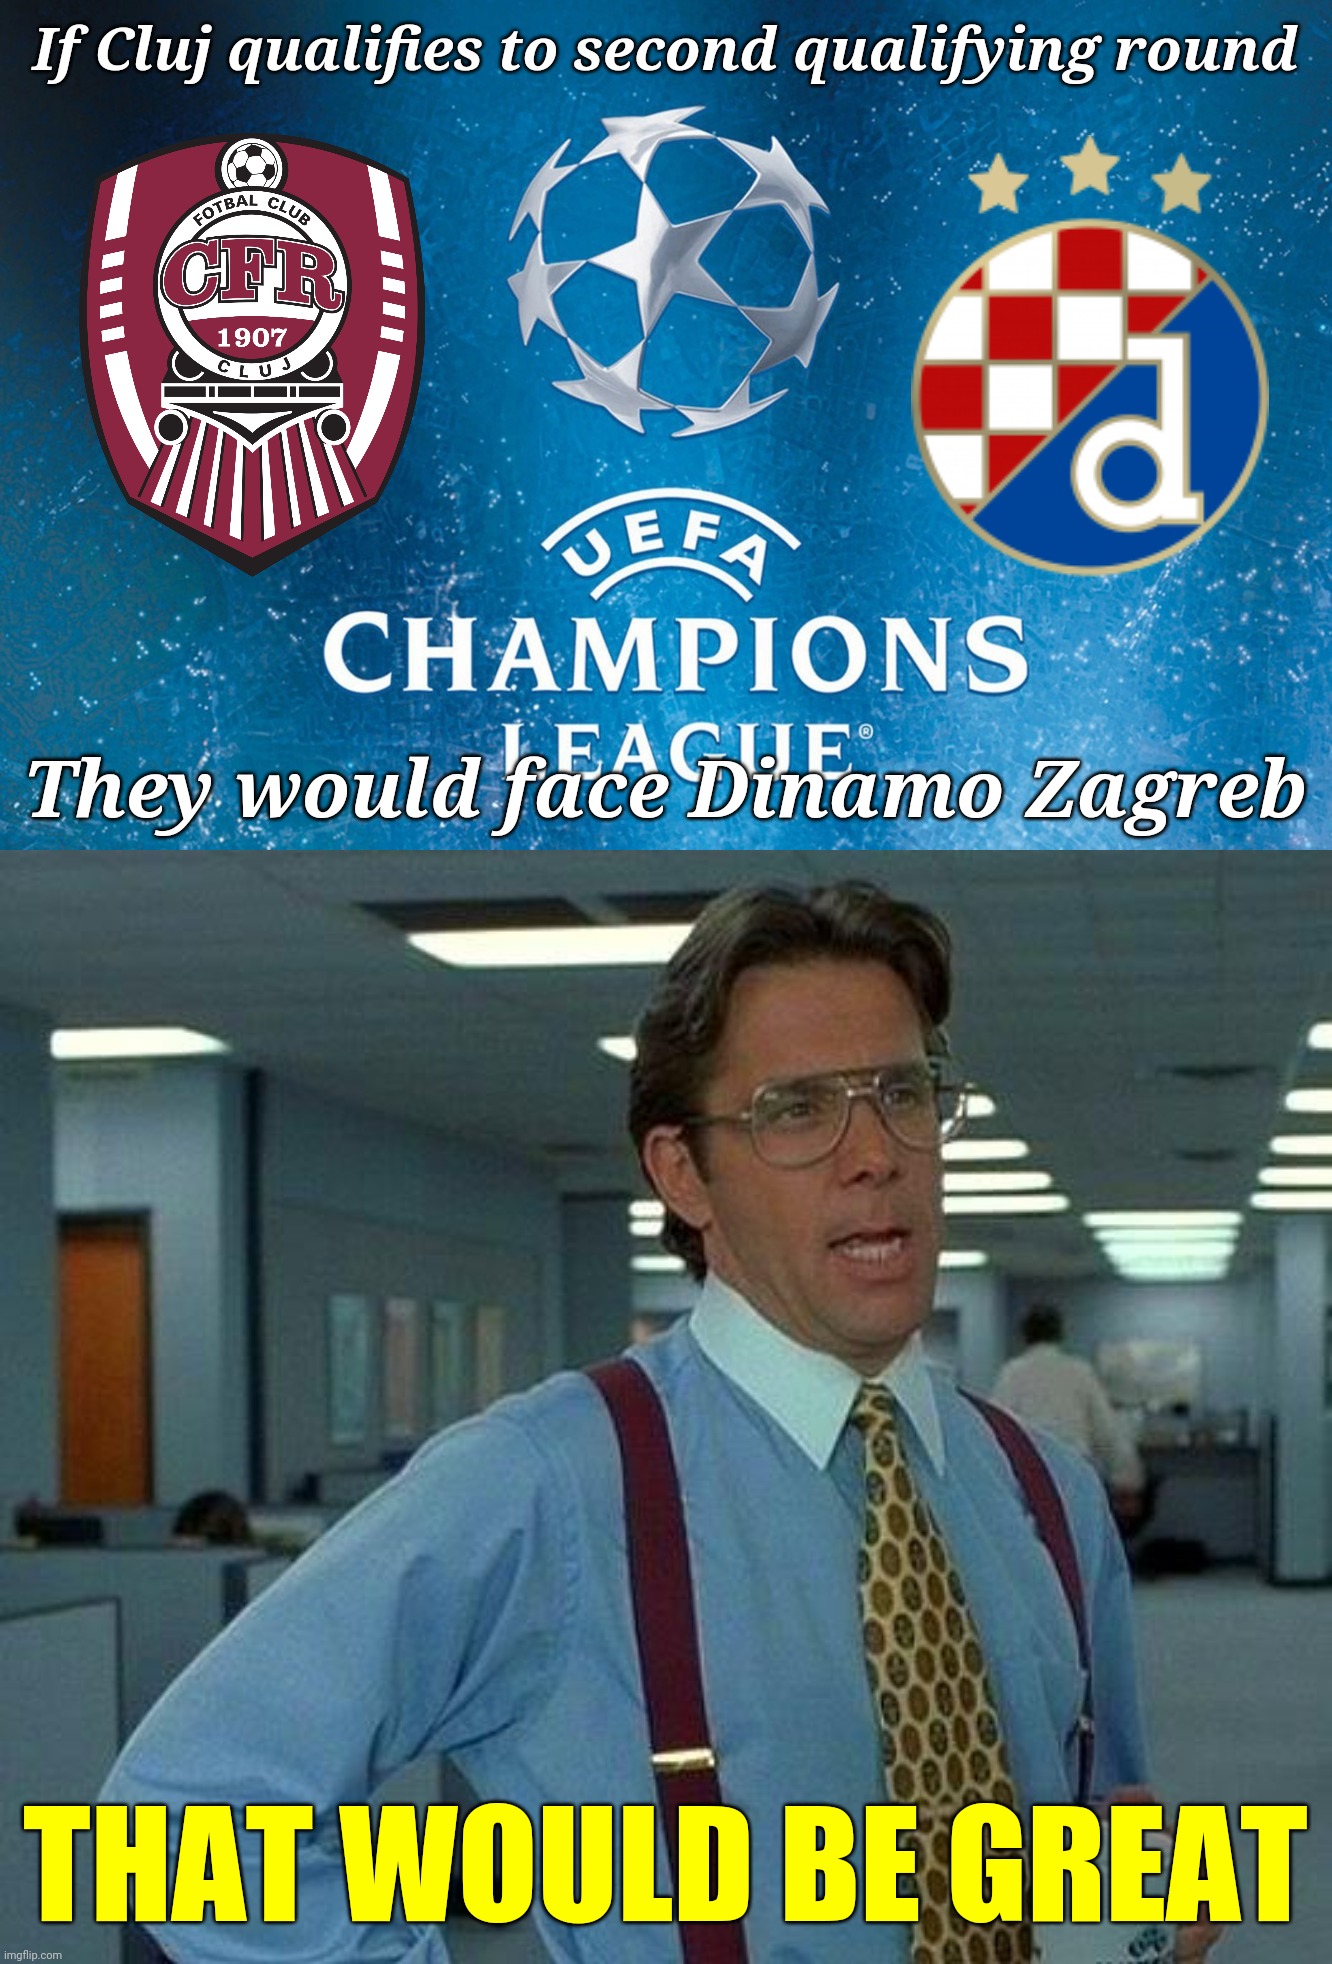 CFR Cluj vs Dinamo Zagreb in UEFA Champions League Second qualifying round | If Cluj qualifies to second qualifying round; They would face Dinamo Zagreb; THAT WOULD BE GREAT | image tagged in memes,that would be great,football,soccer,champions league,cfr cluj | made w/ Imgflip meme maker